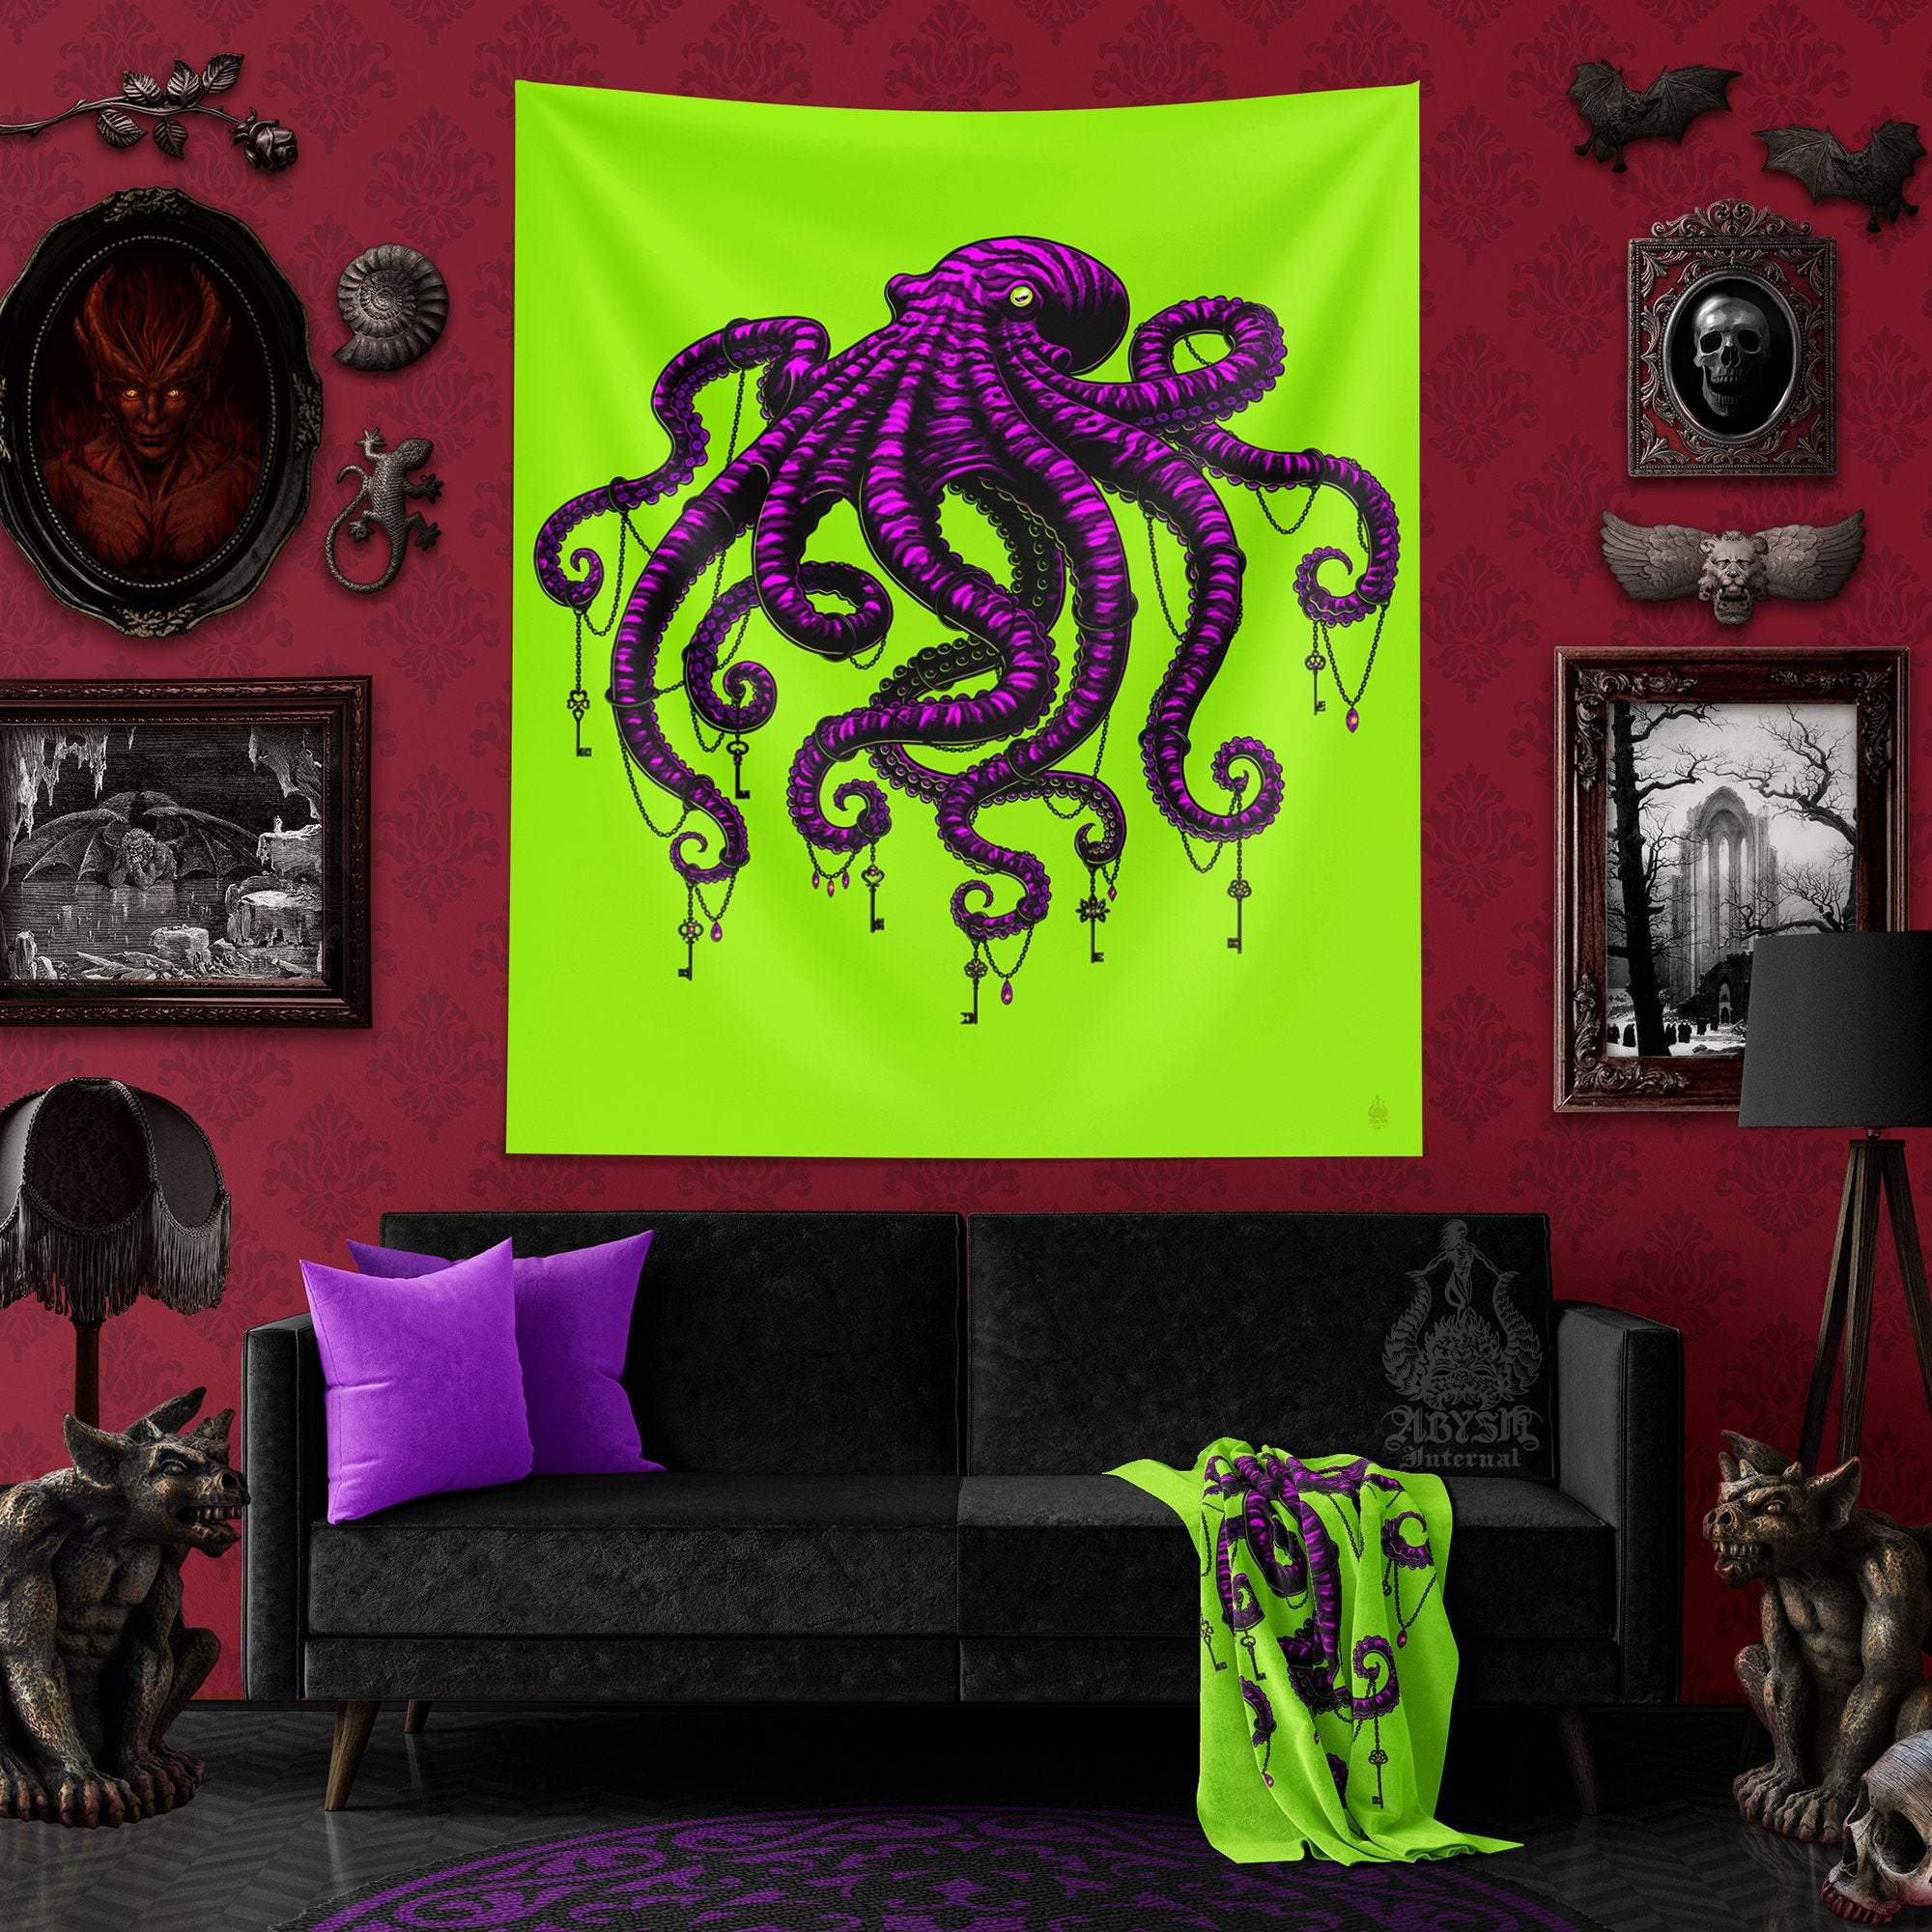 Psy Tapestry, Octopus Wall Hanging, Psychedelic Home Decor, Art Print - Gothic Neon - Abysm Internal